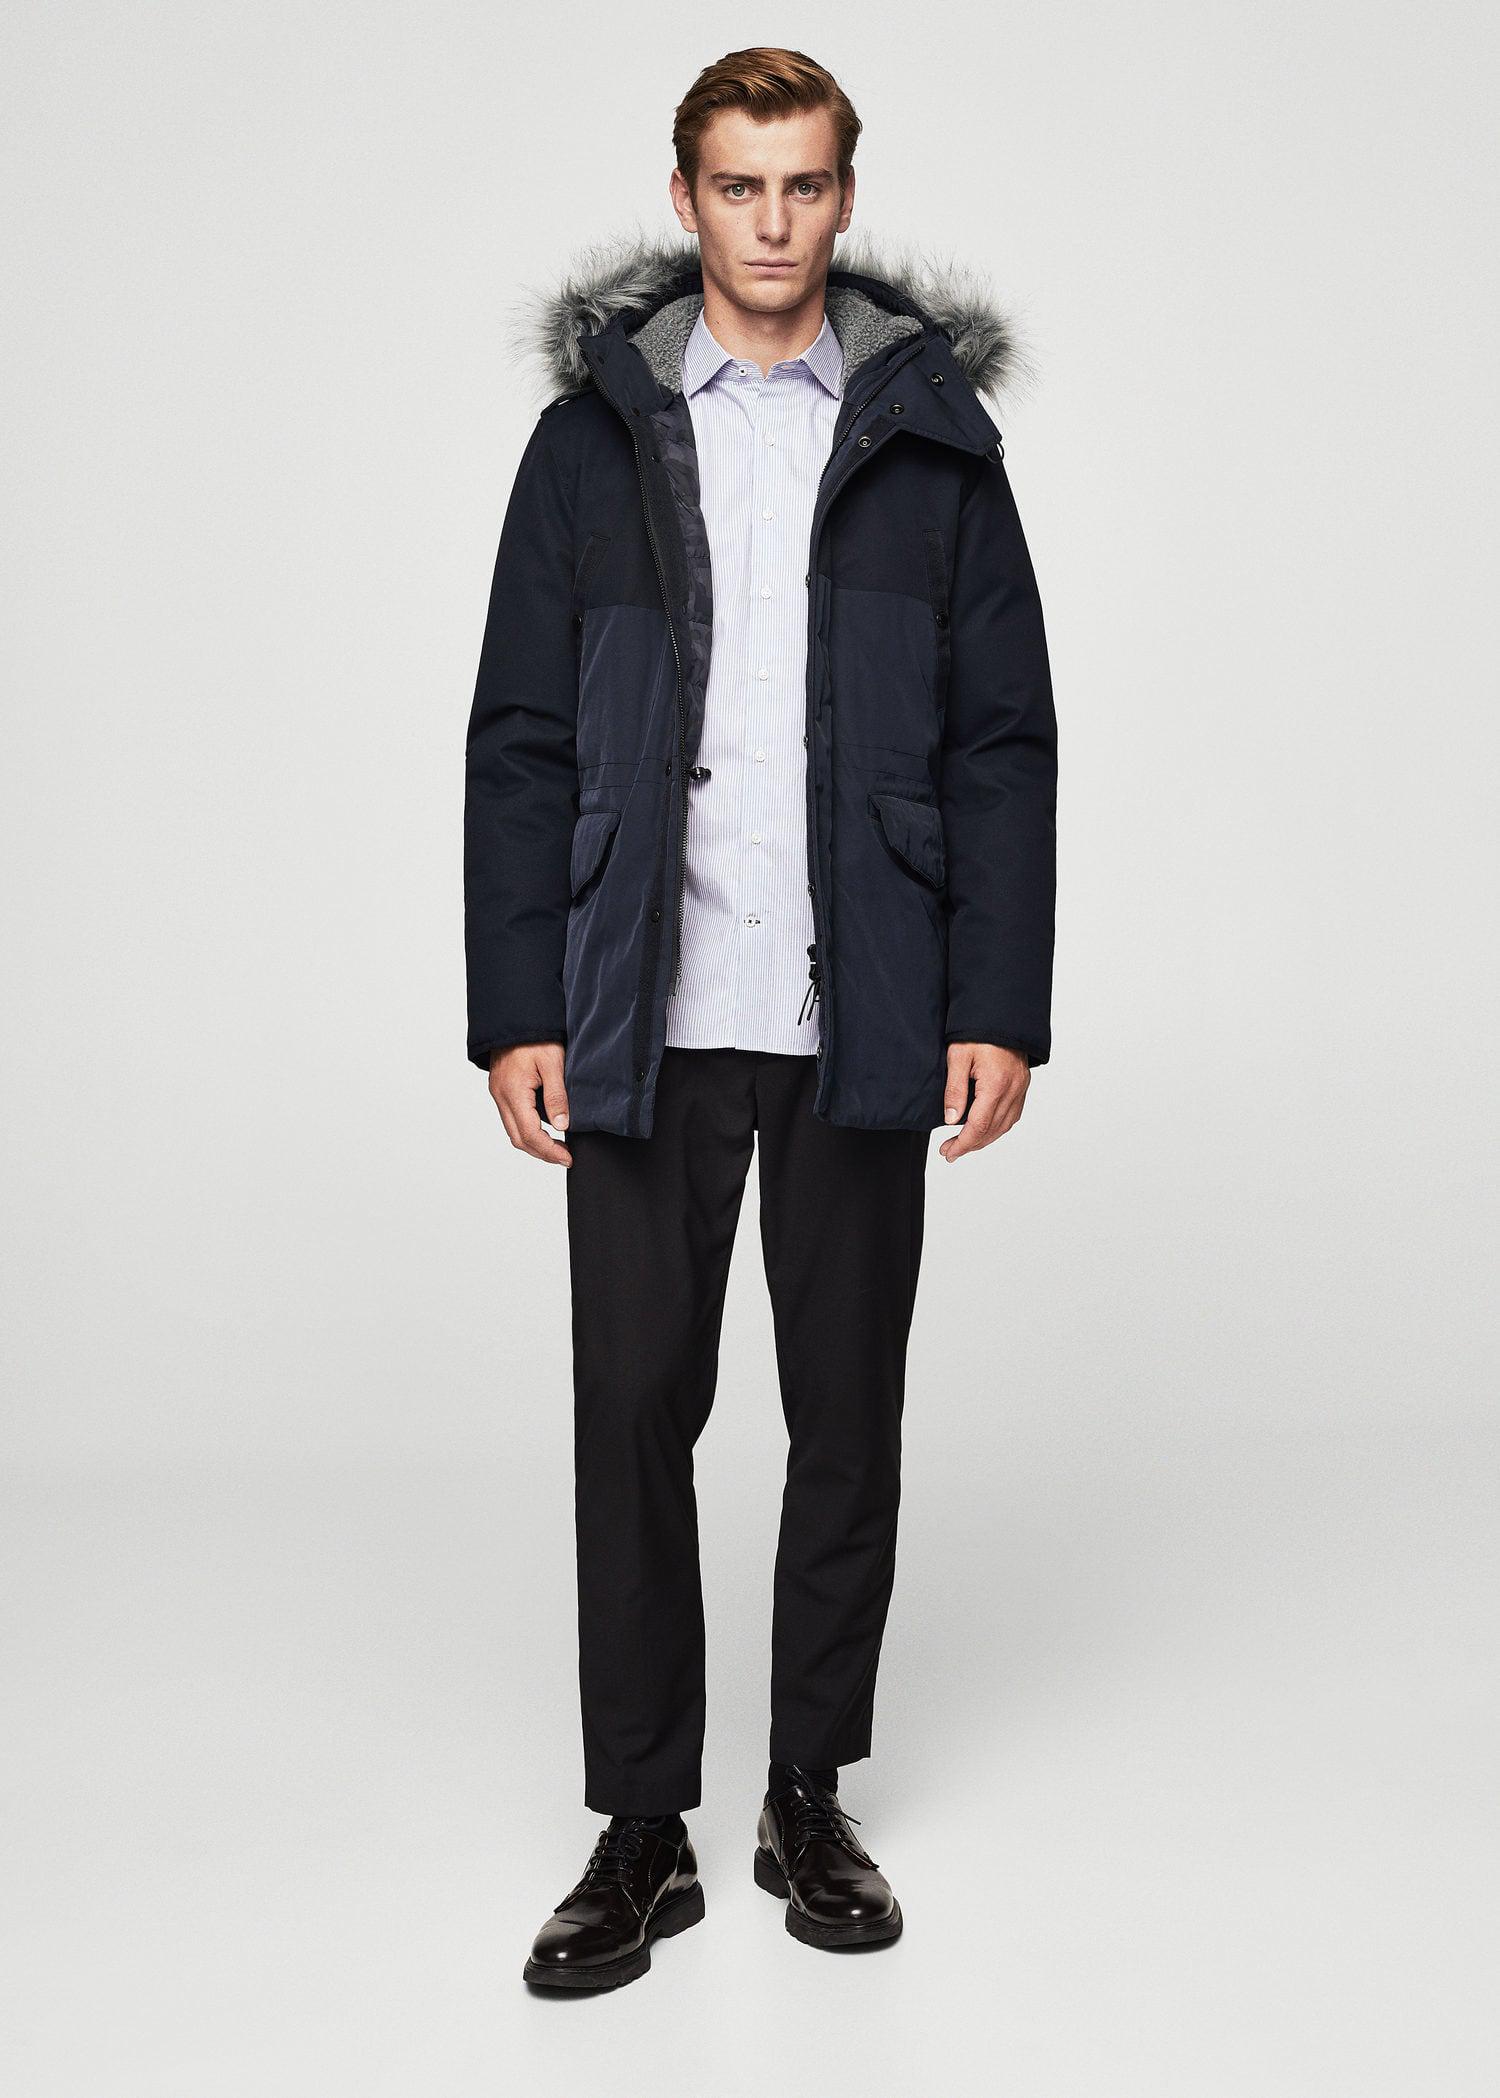 Lyst - Mango Mixed Quilted Jacket in Blue